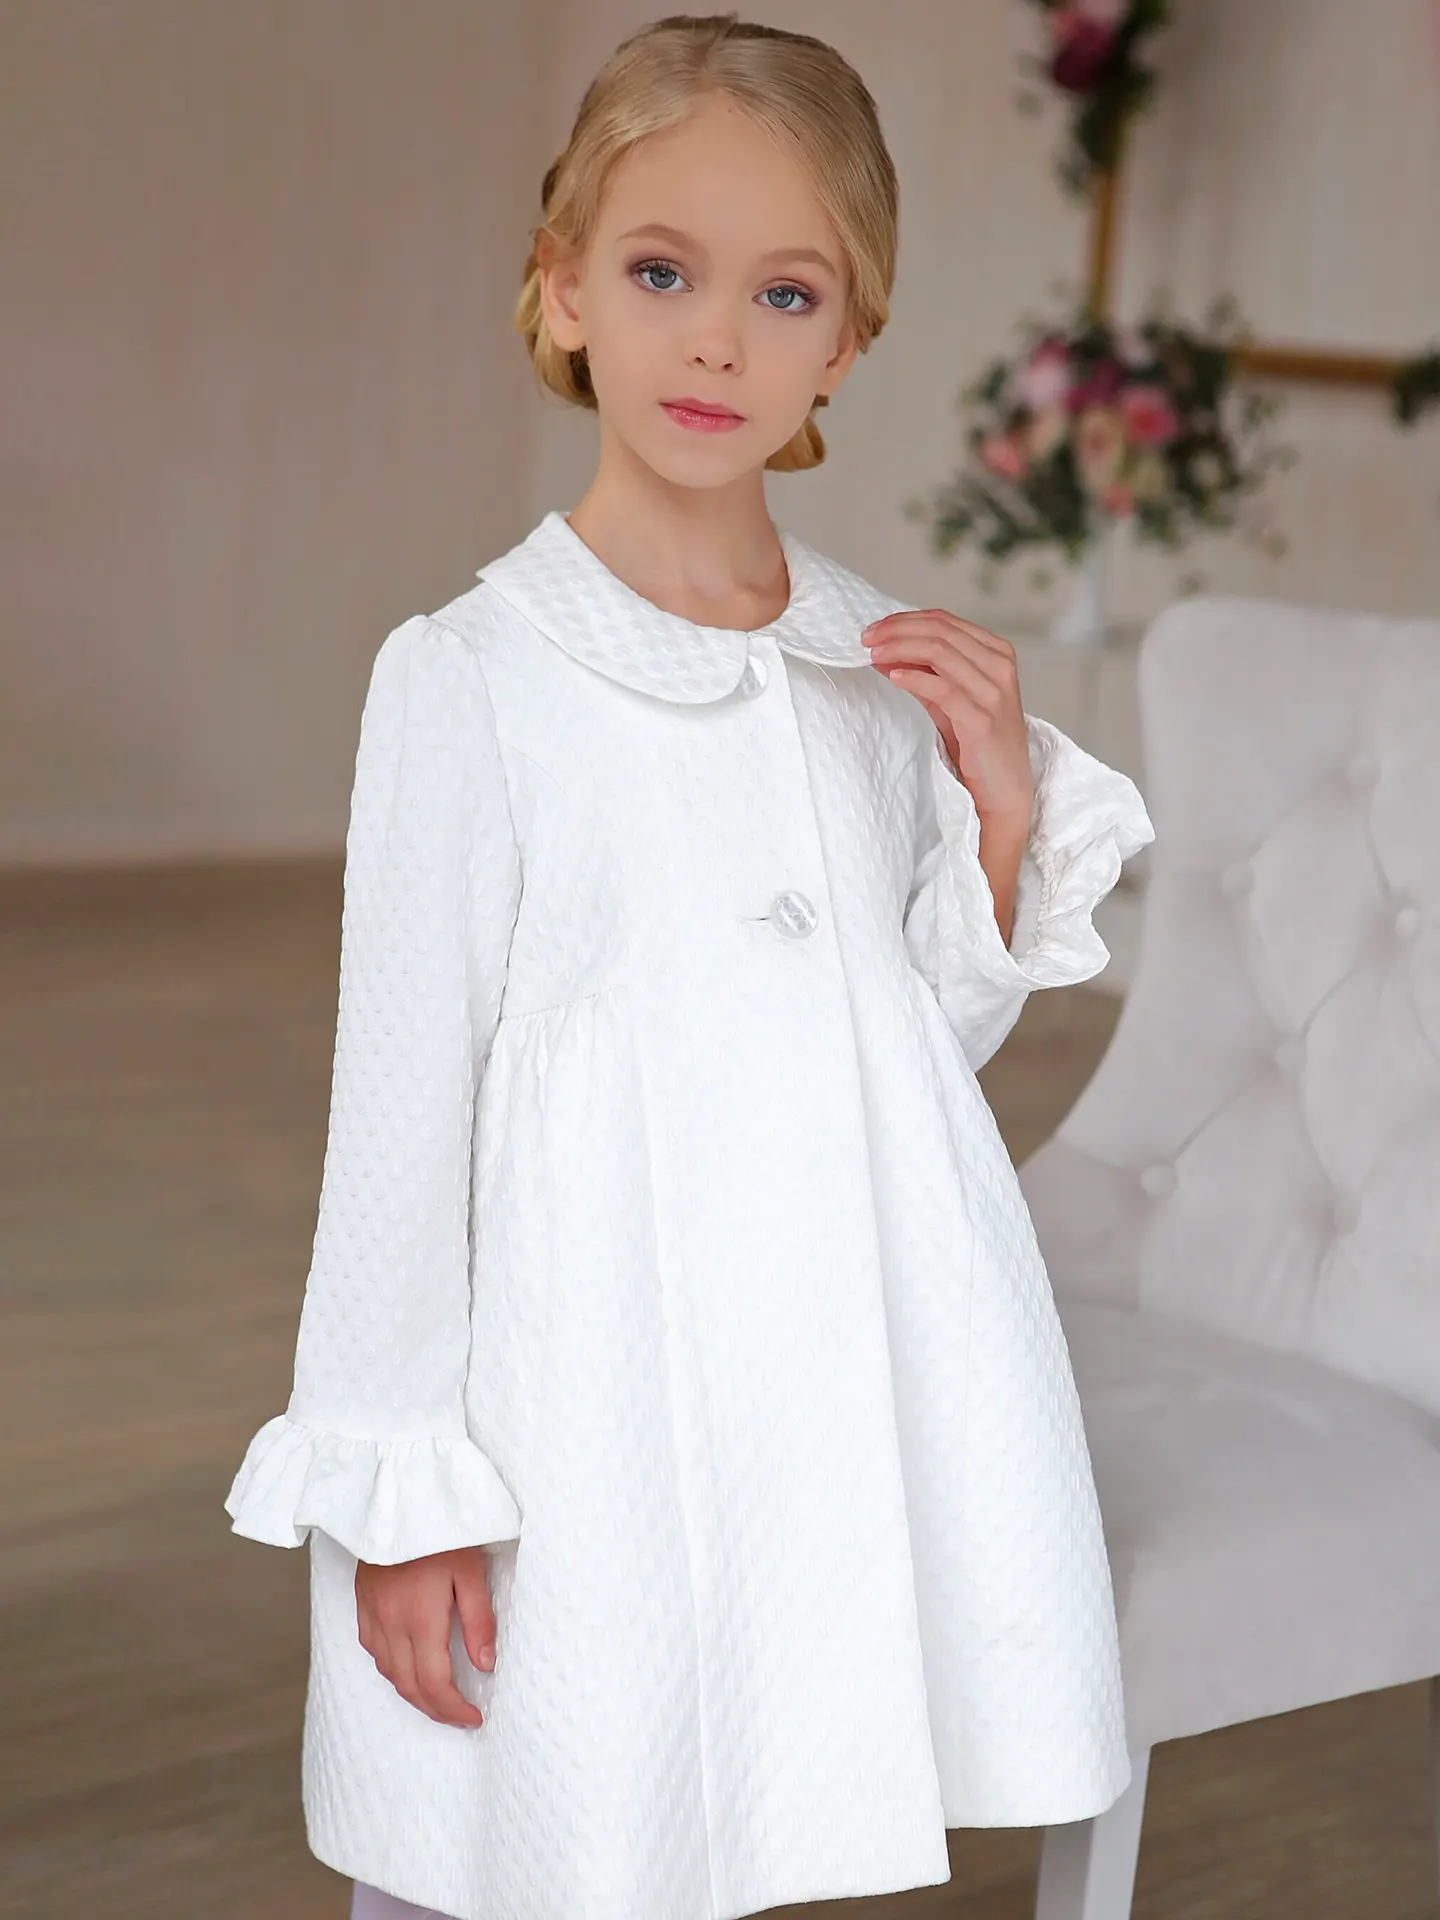 Stylish, High-quality, Comfortable off-white coat and dress for girl